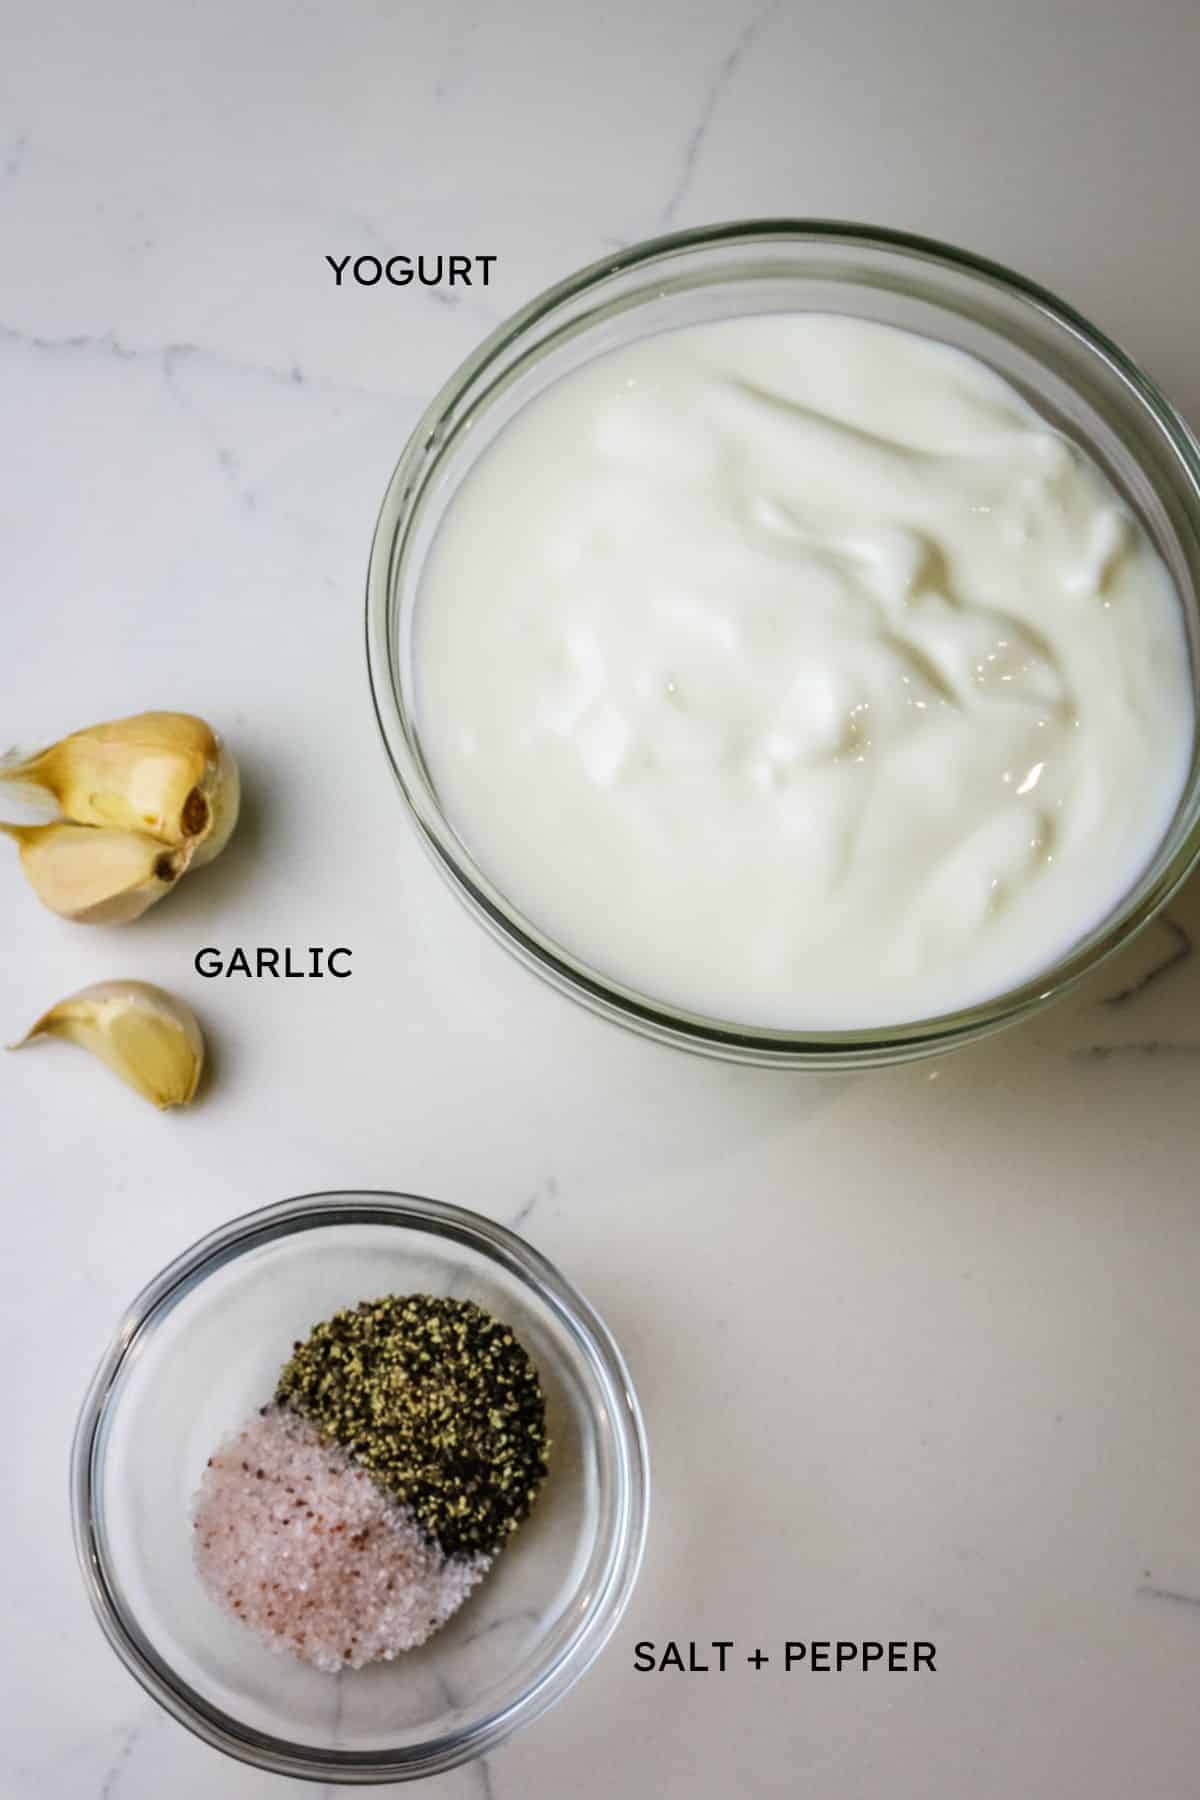 ingredients to garlic yogurt sauce on a flat white surface with labels.